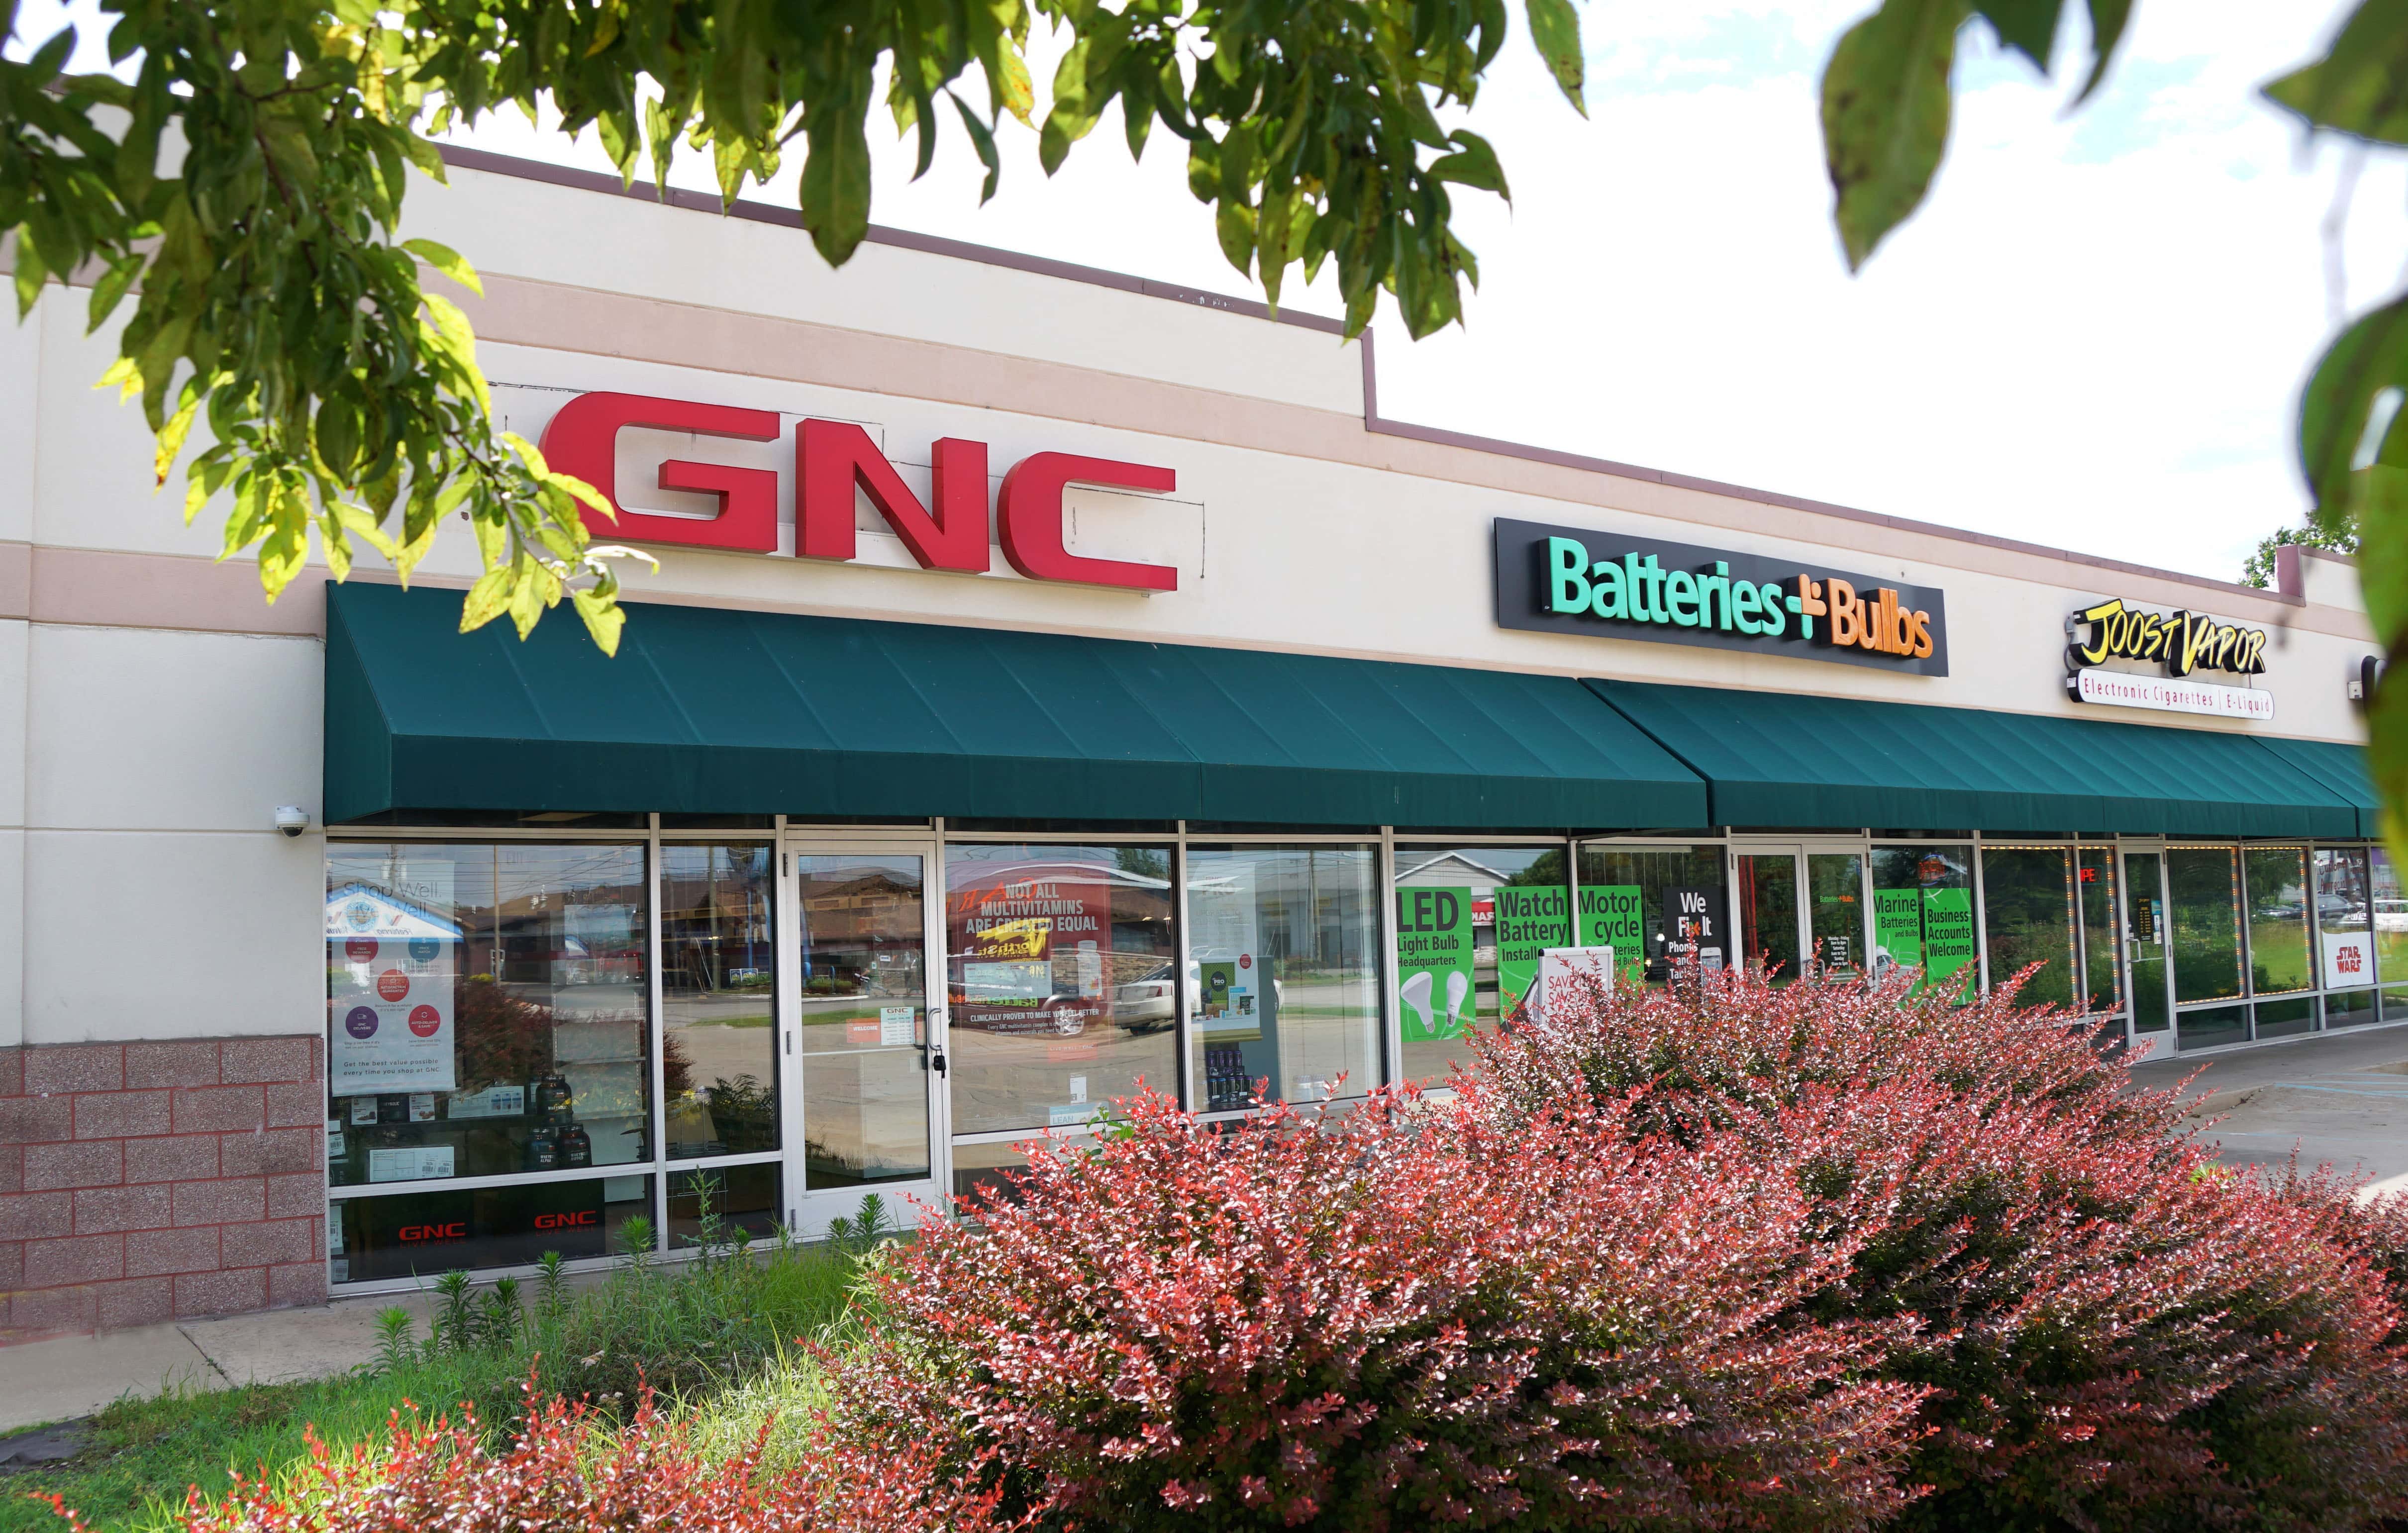 GNC in Bankruptcy, Closing Up to 1,200 Stores, But Not M139 Store in